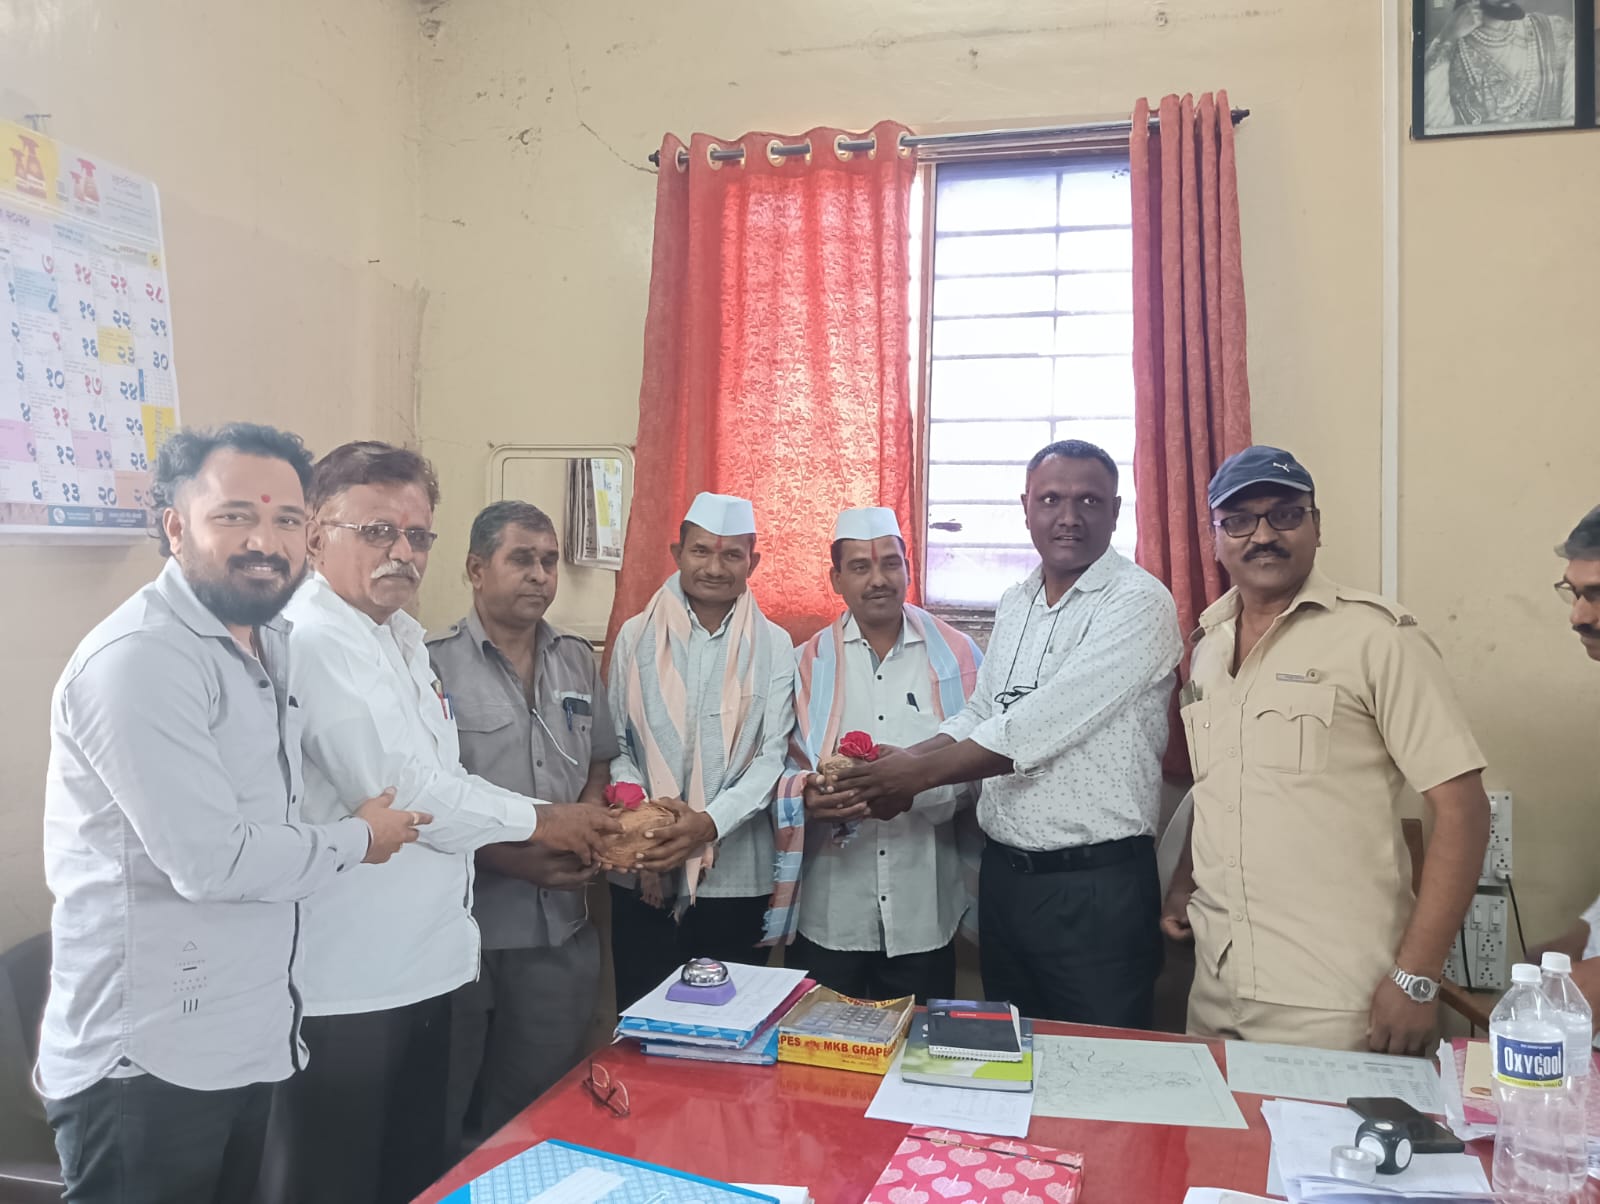 ST bus drivers felicitated in Karmala for making the Ayodhya ferry a success